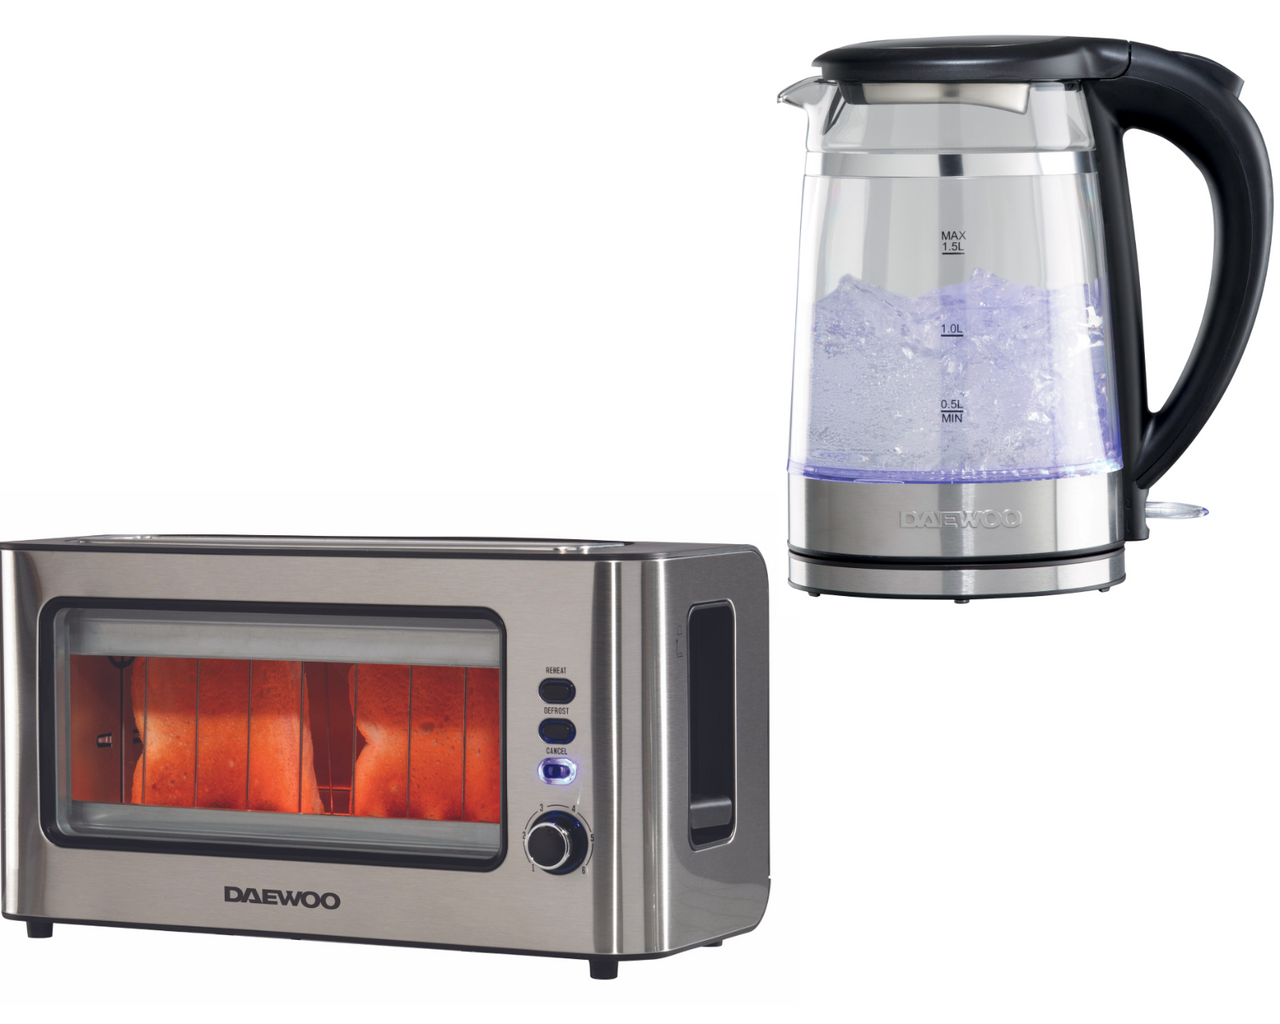 Daewoo 1.7L 3KW Glass Kettle & 2 Slice Glass Toaster Matching Set in Silver